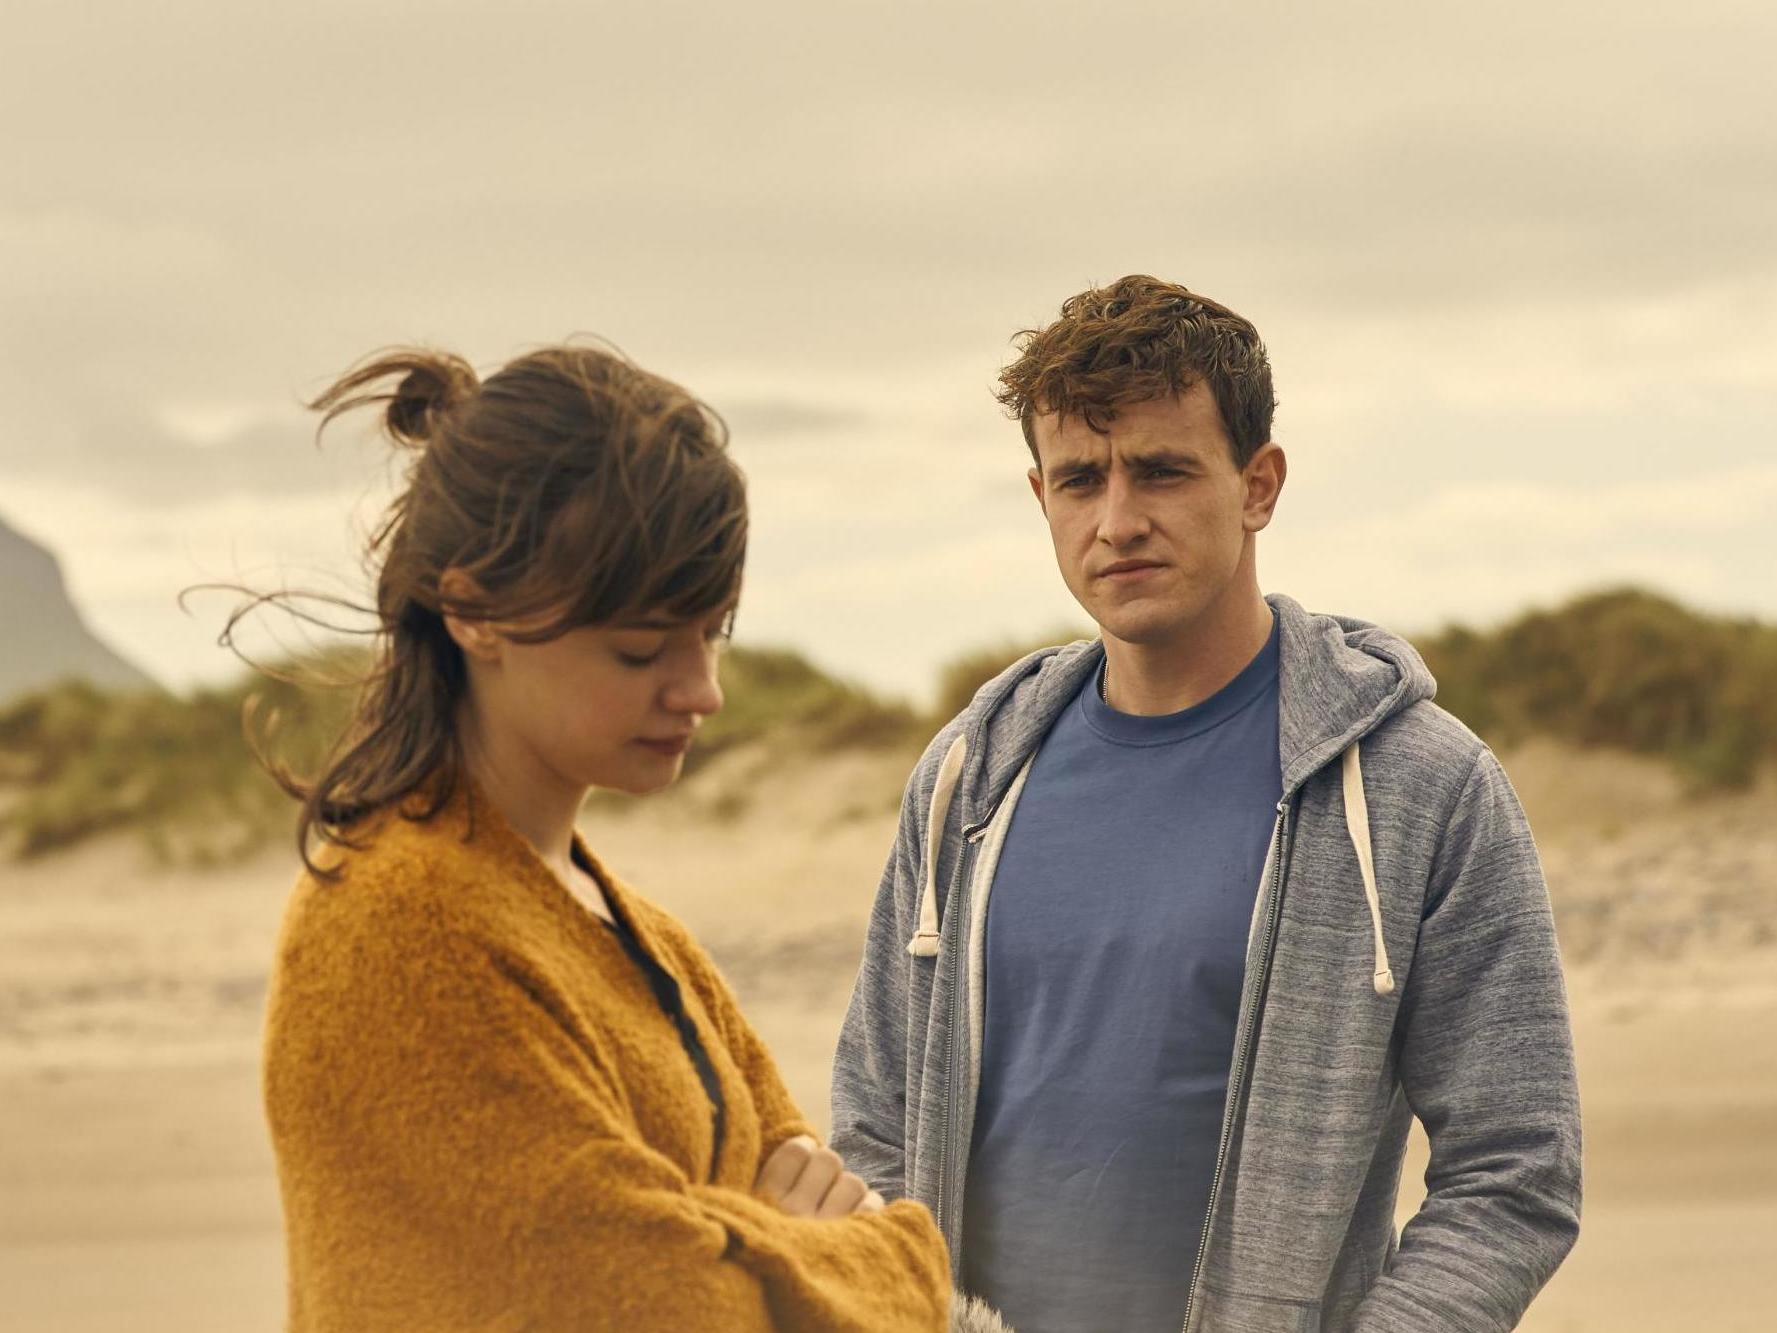 Daisy Edgar-Jones and Paul Mescal as Marianne and Connell in Sally Rooney adaptation 'Normal People'